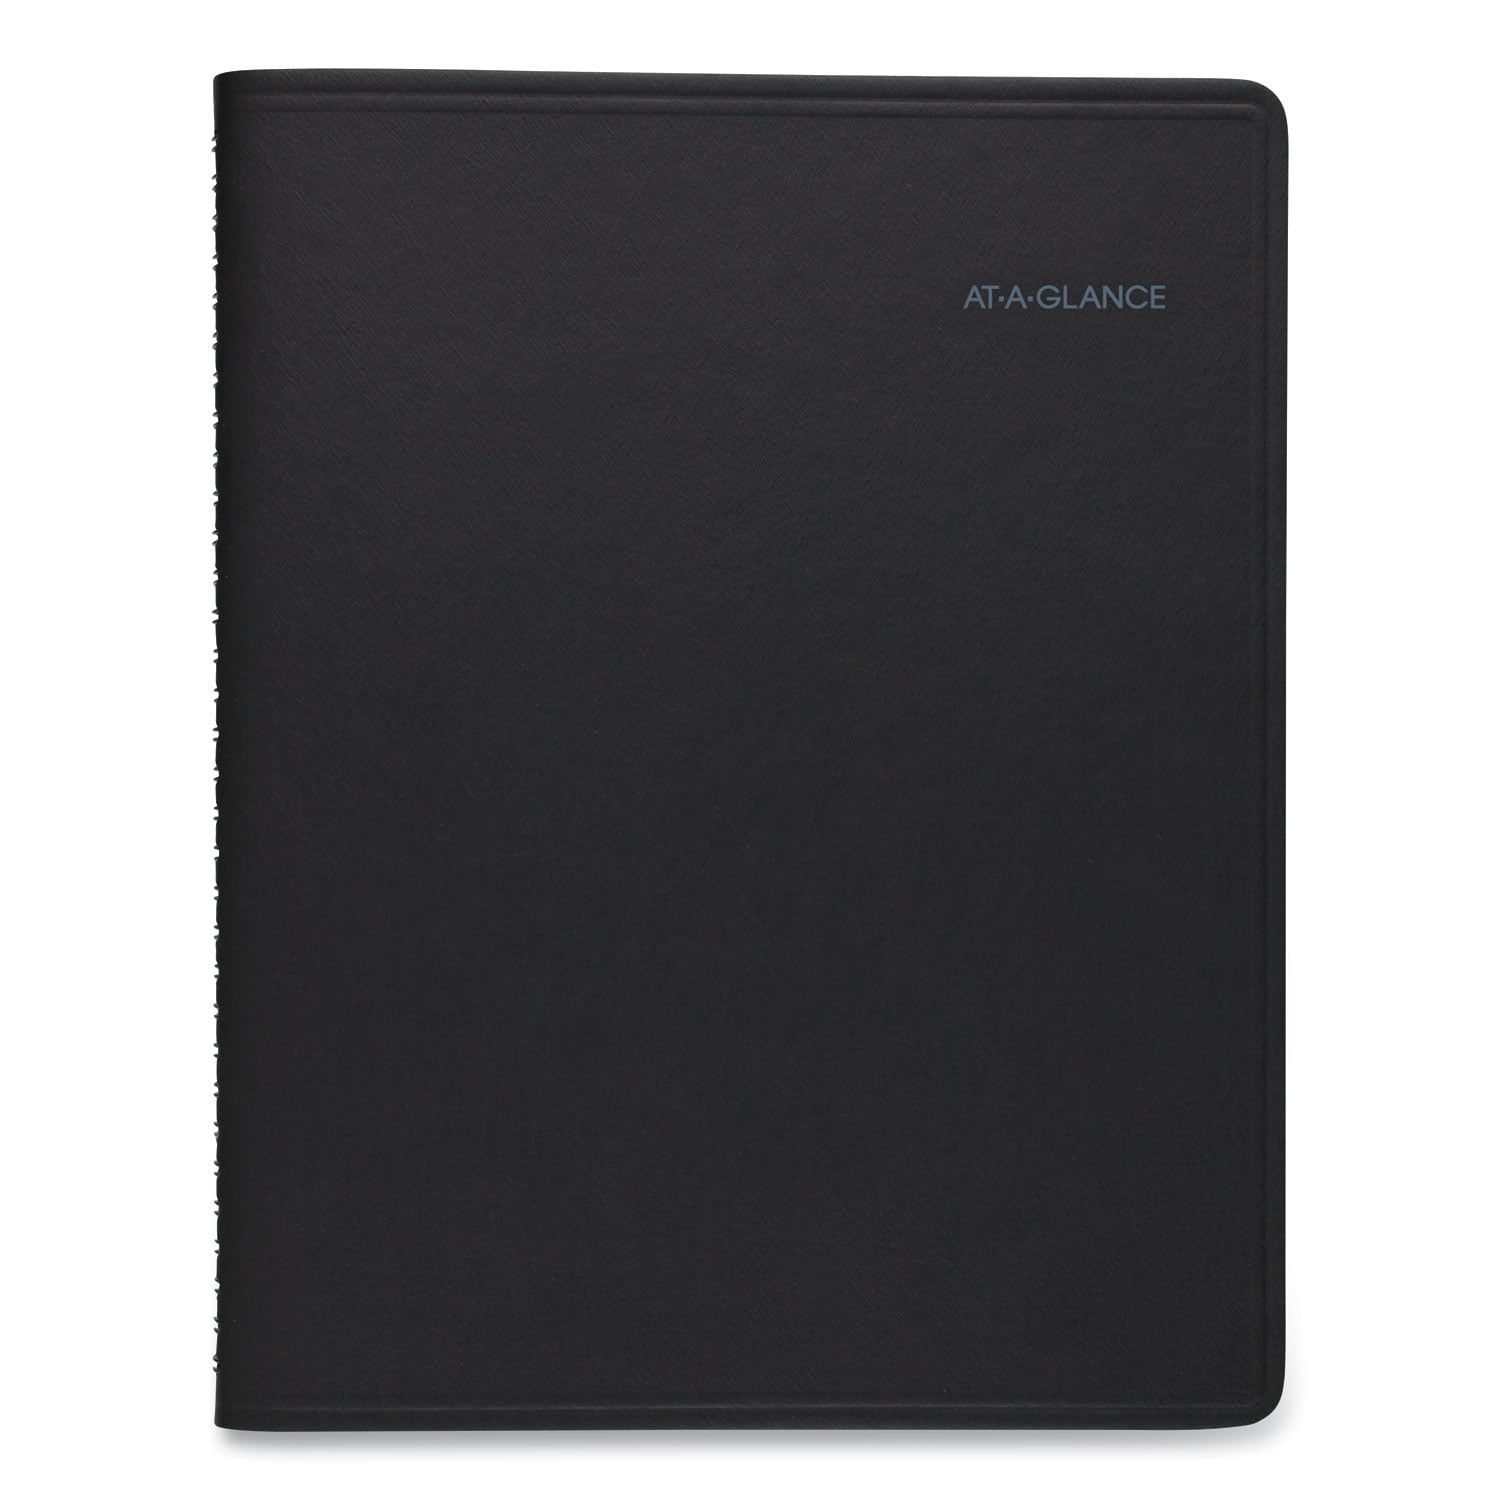 Photo 1 of AT-A-GLANCE Quicknotes Monthly Planner, 11" x 8.25", Black, 2021